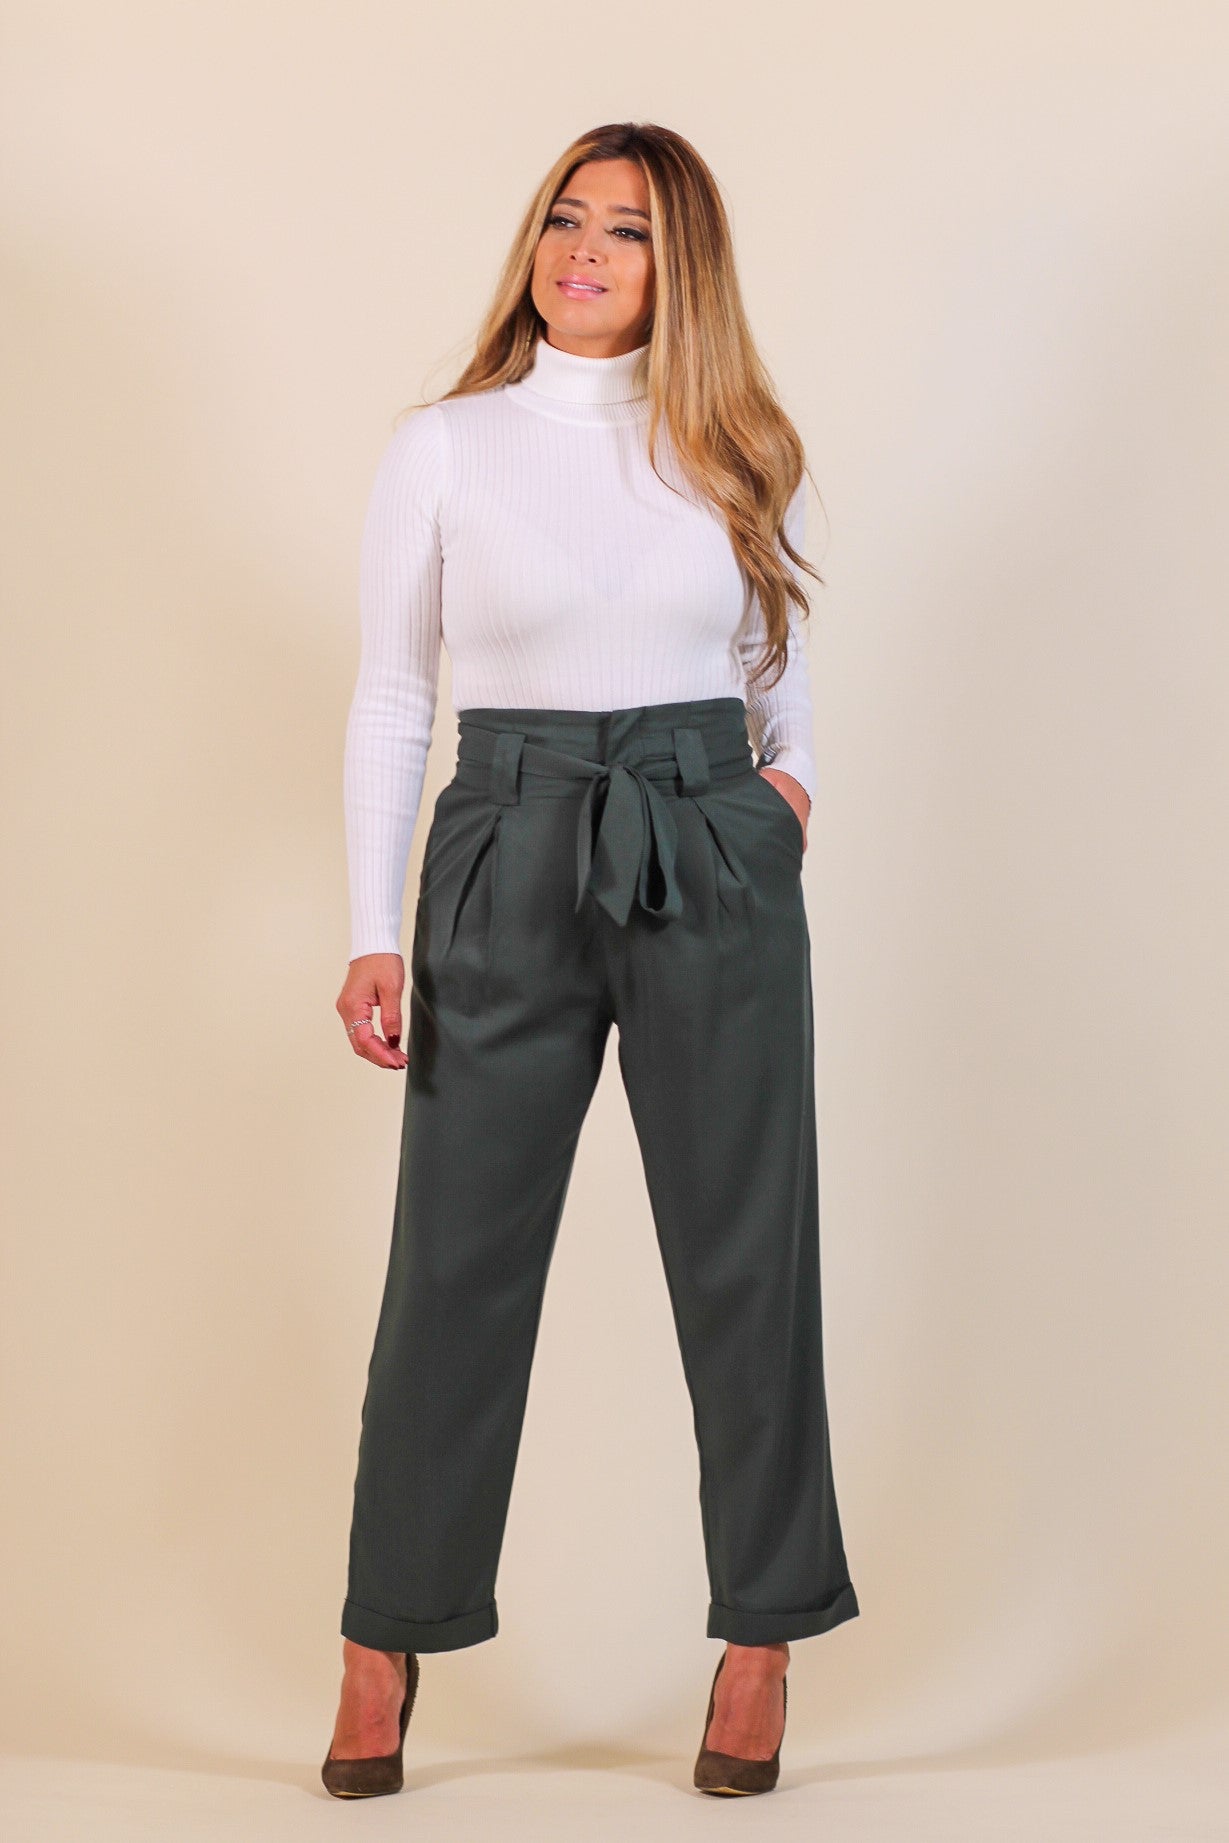 Victoria Beckham high-waisted Paperbag Trousers - Farfetch